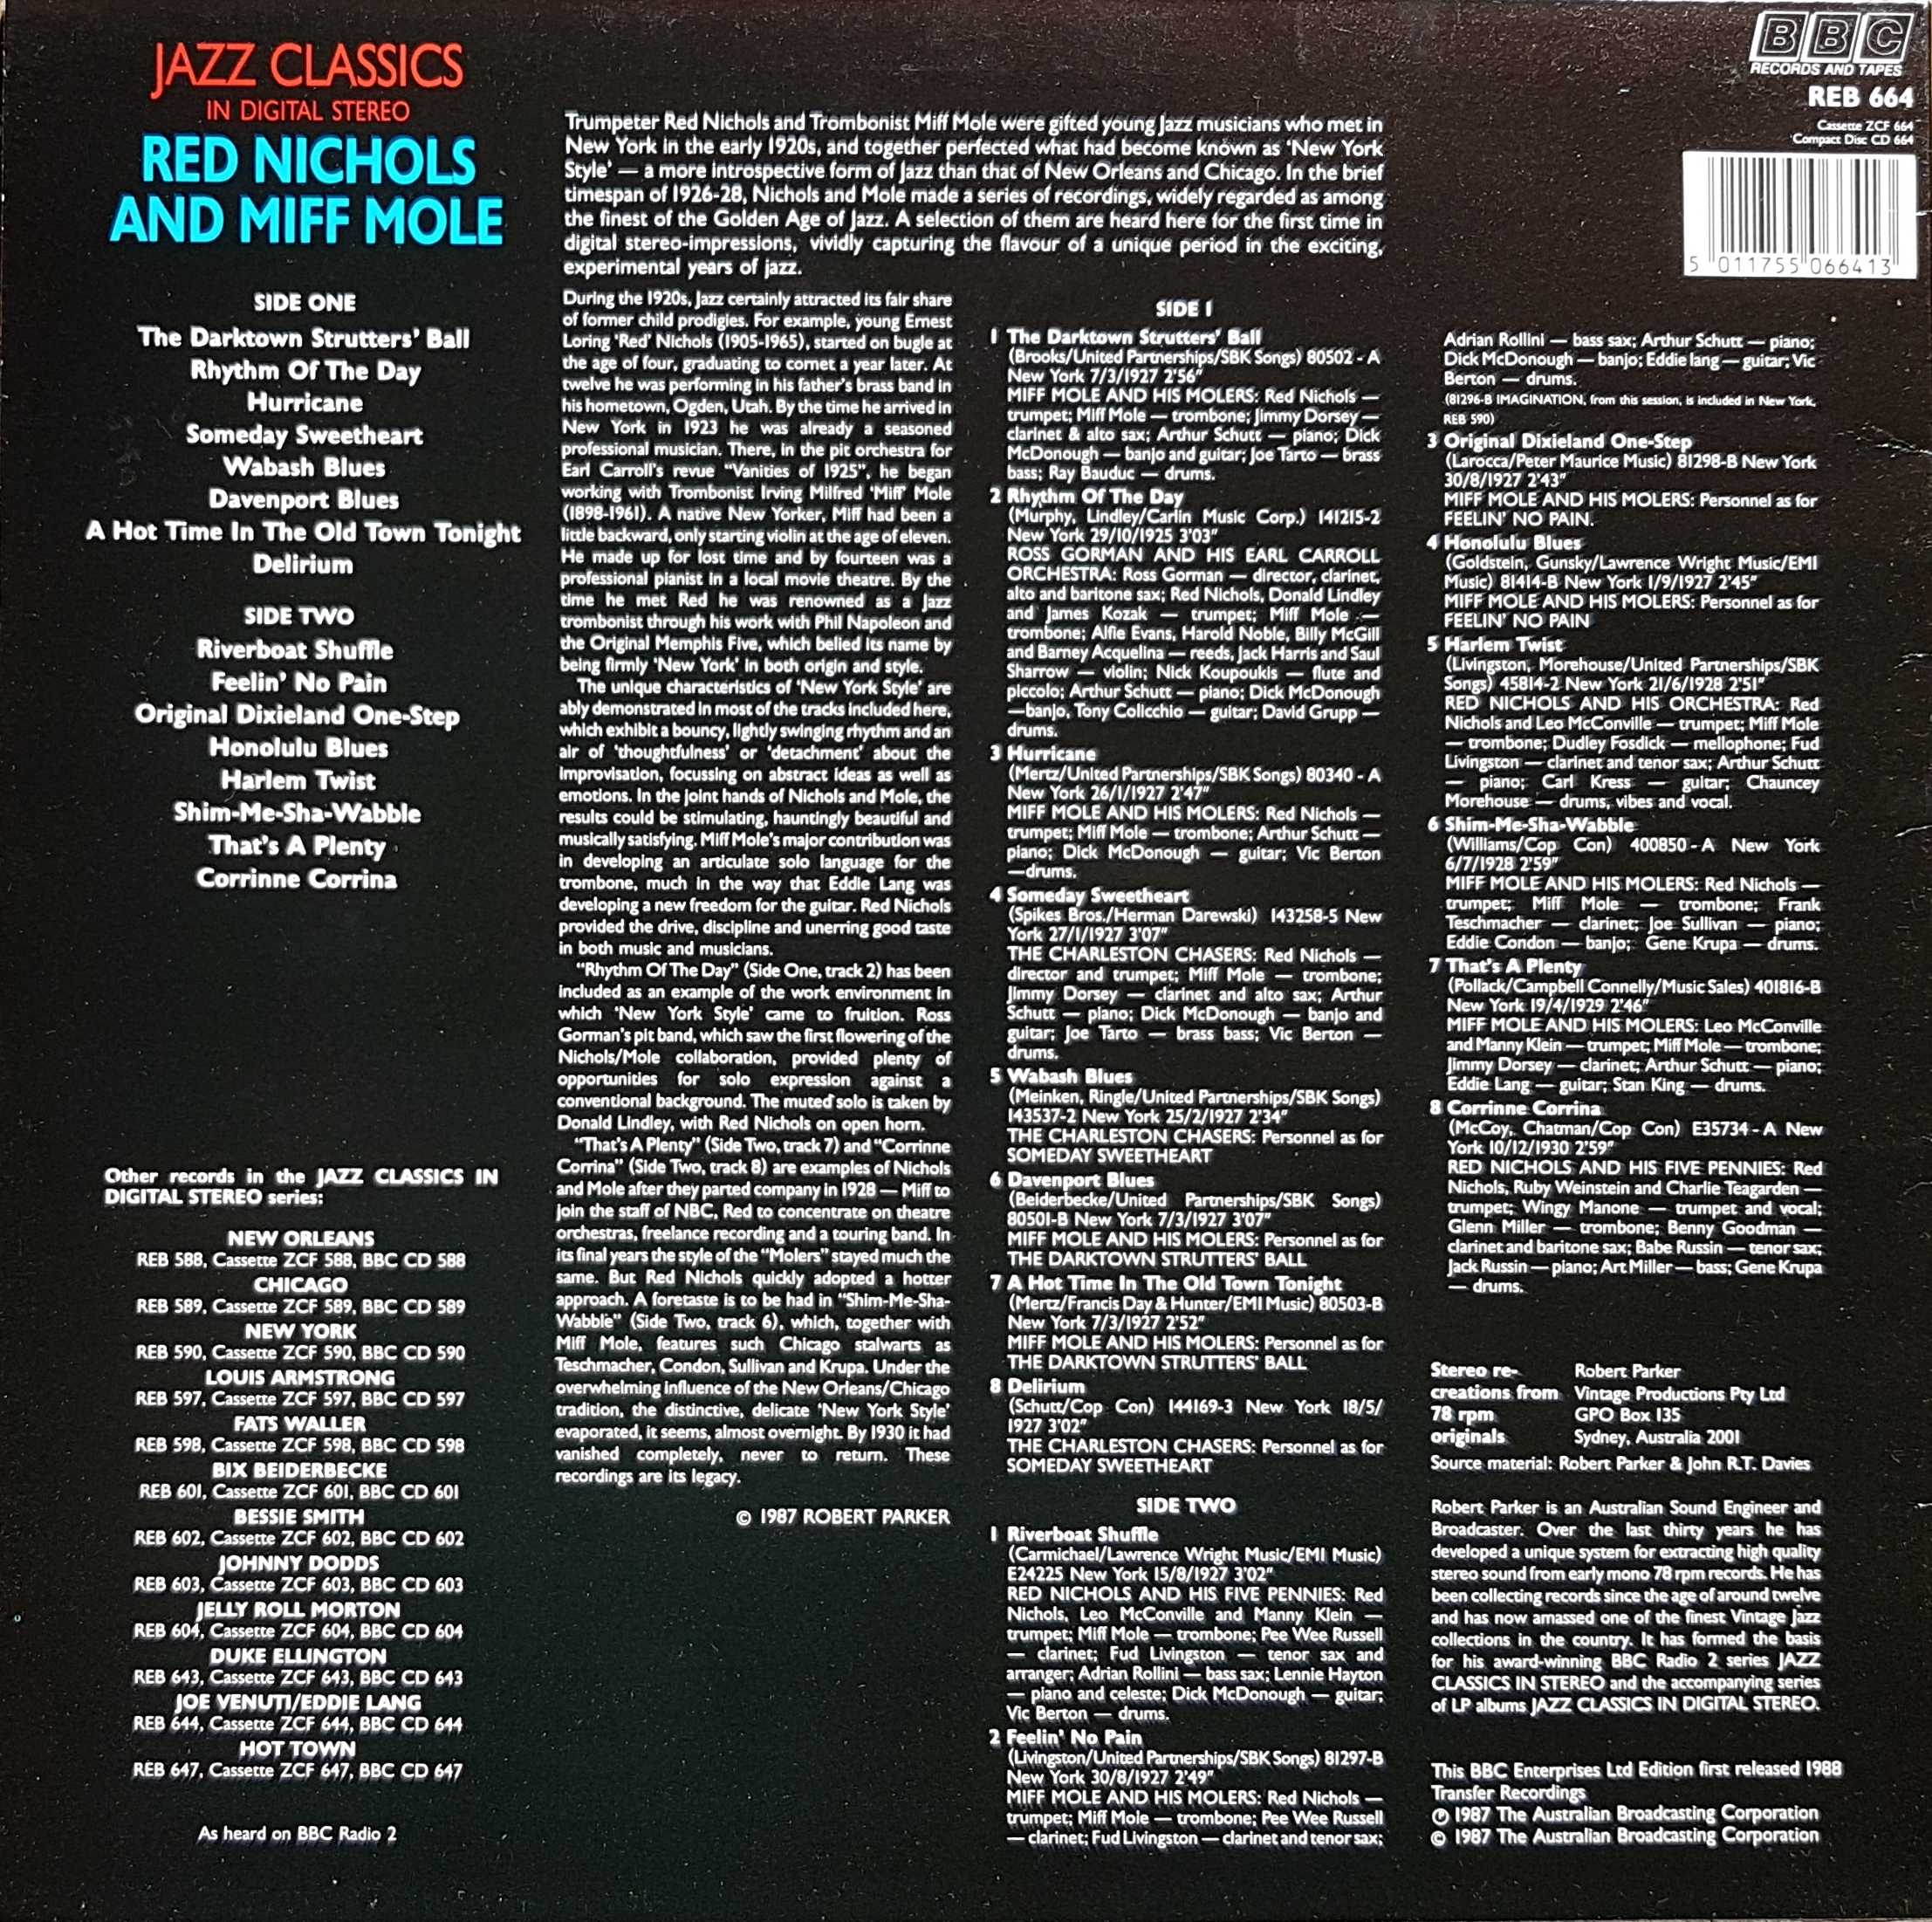 Picture of REB 664 Jazz classics - Red Nichols and Miff Mole by artist Nichols / Mole from the BBC records and Tapes library